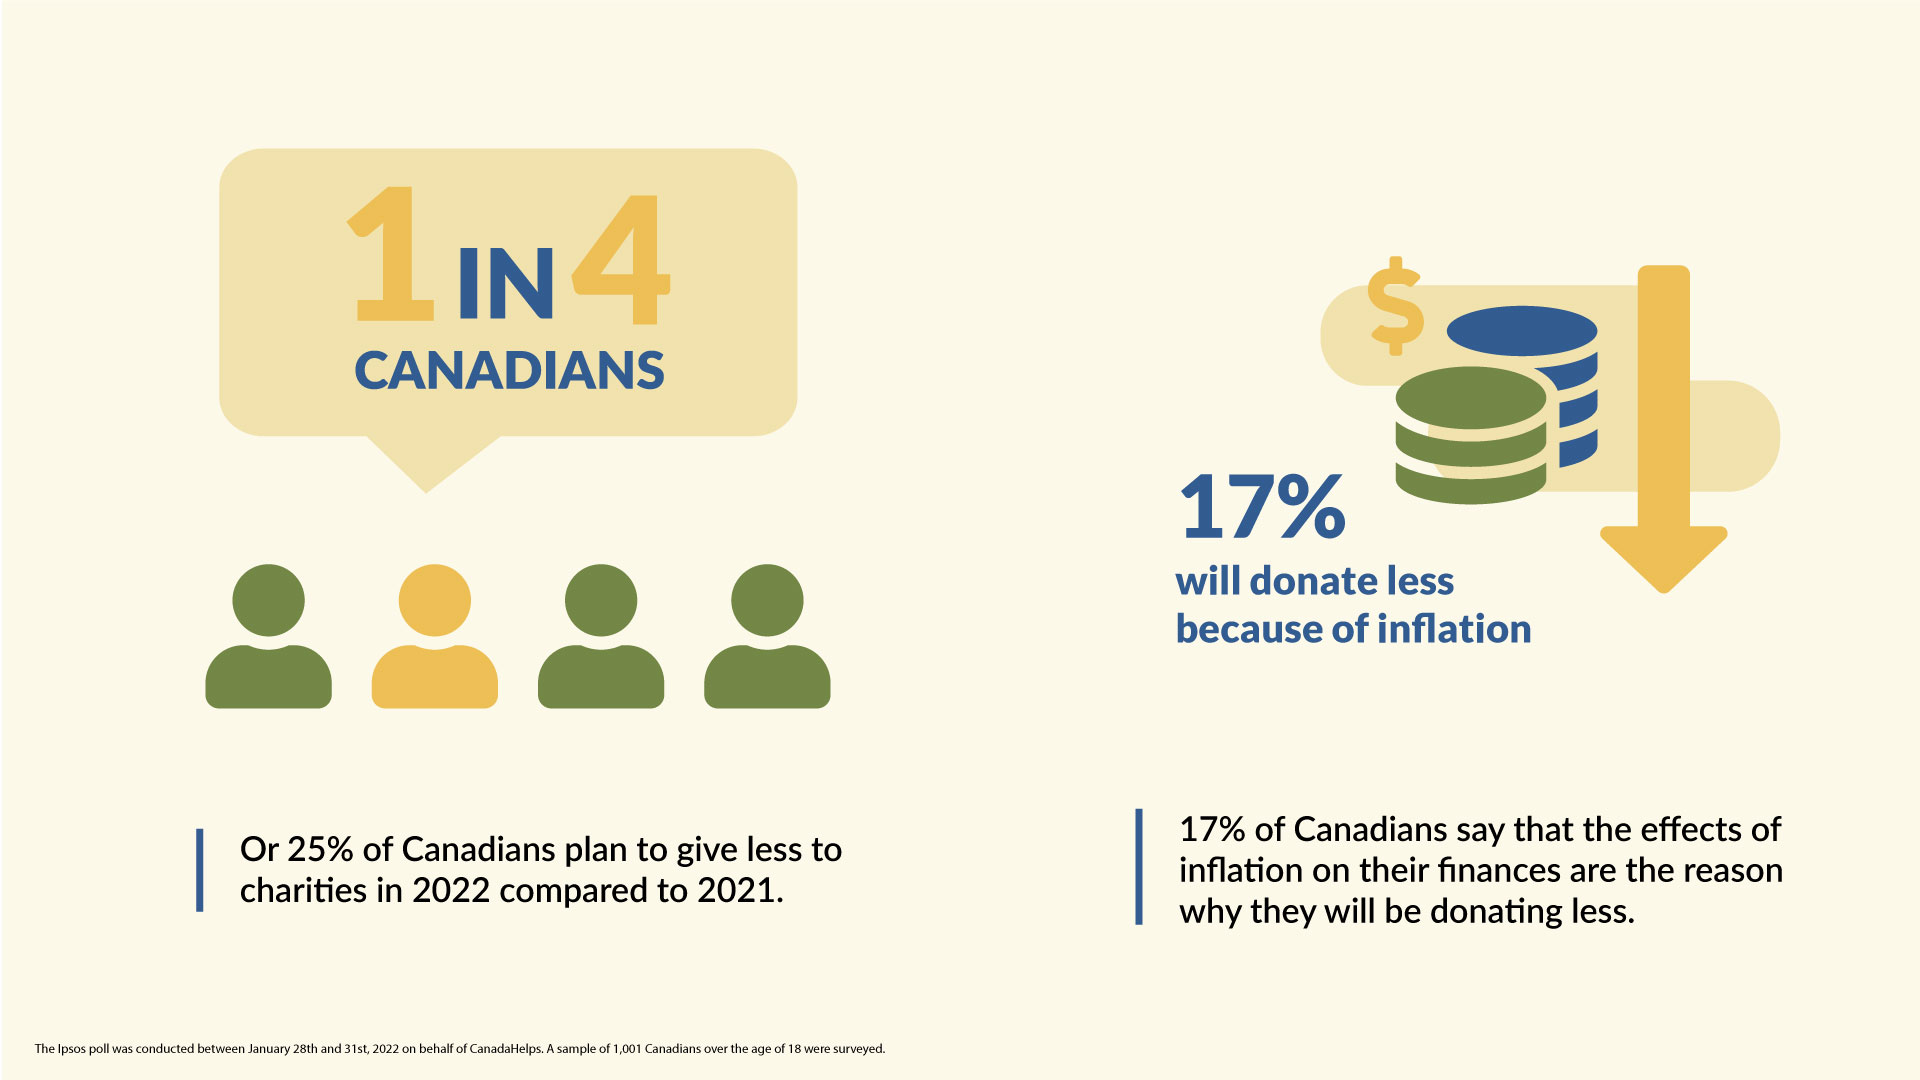 As 25% of Canadians plan to give less to charities in 2022 compared to 2021, CanadaHelps renews its call for Canadians to give as charities face rising demand.